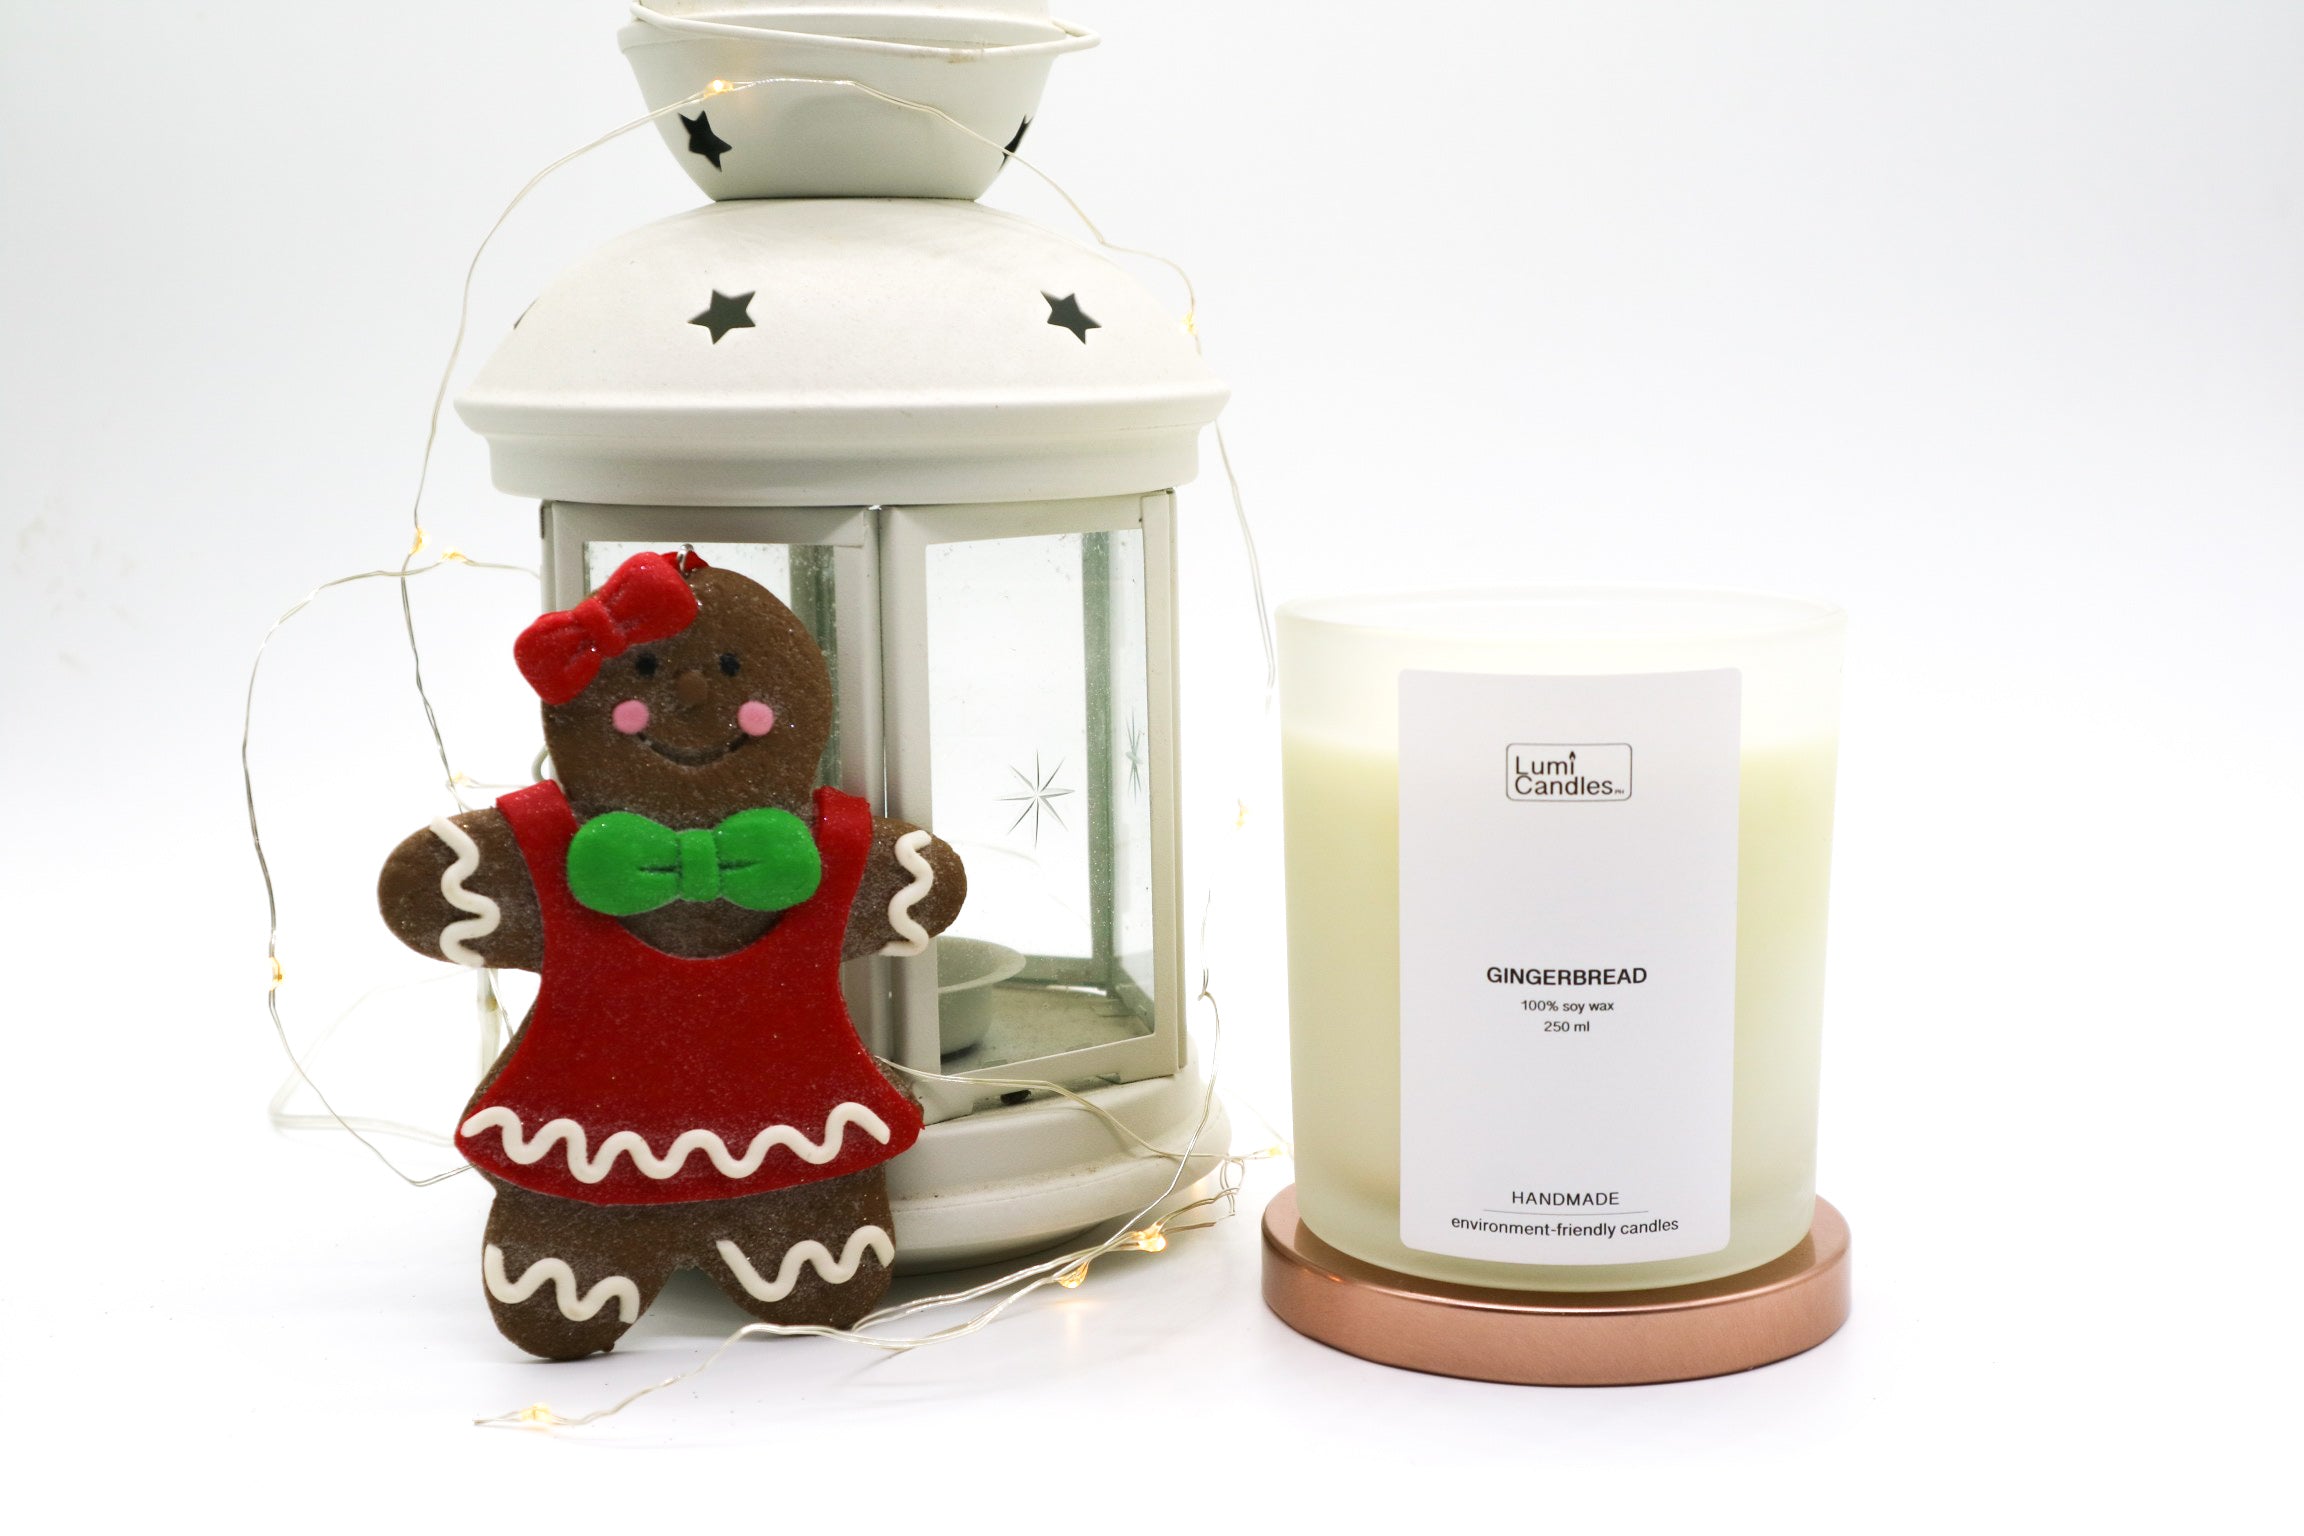 LUMI Gingerbread 250ml scented soy candle